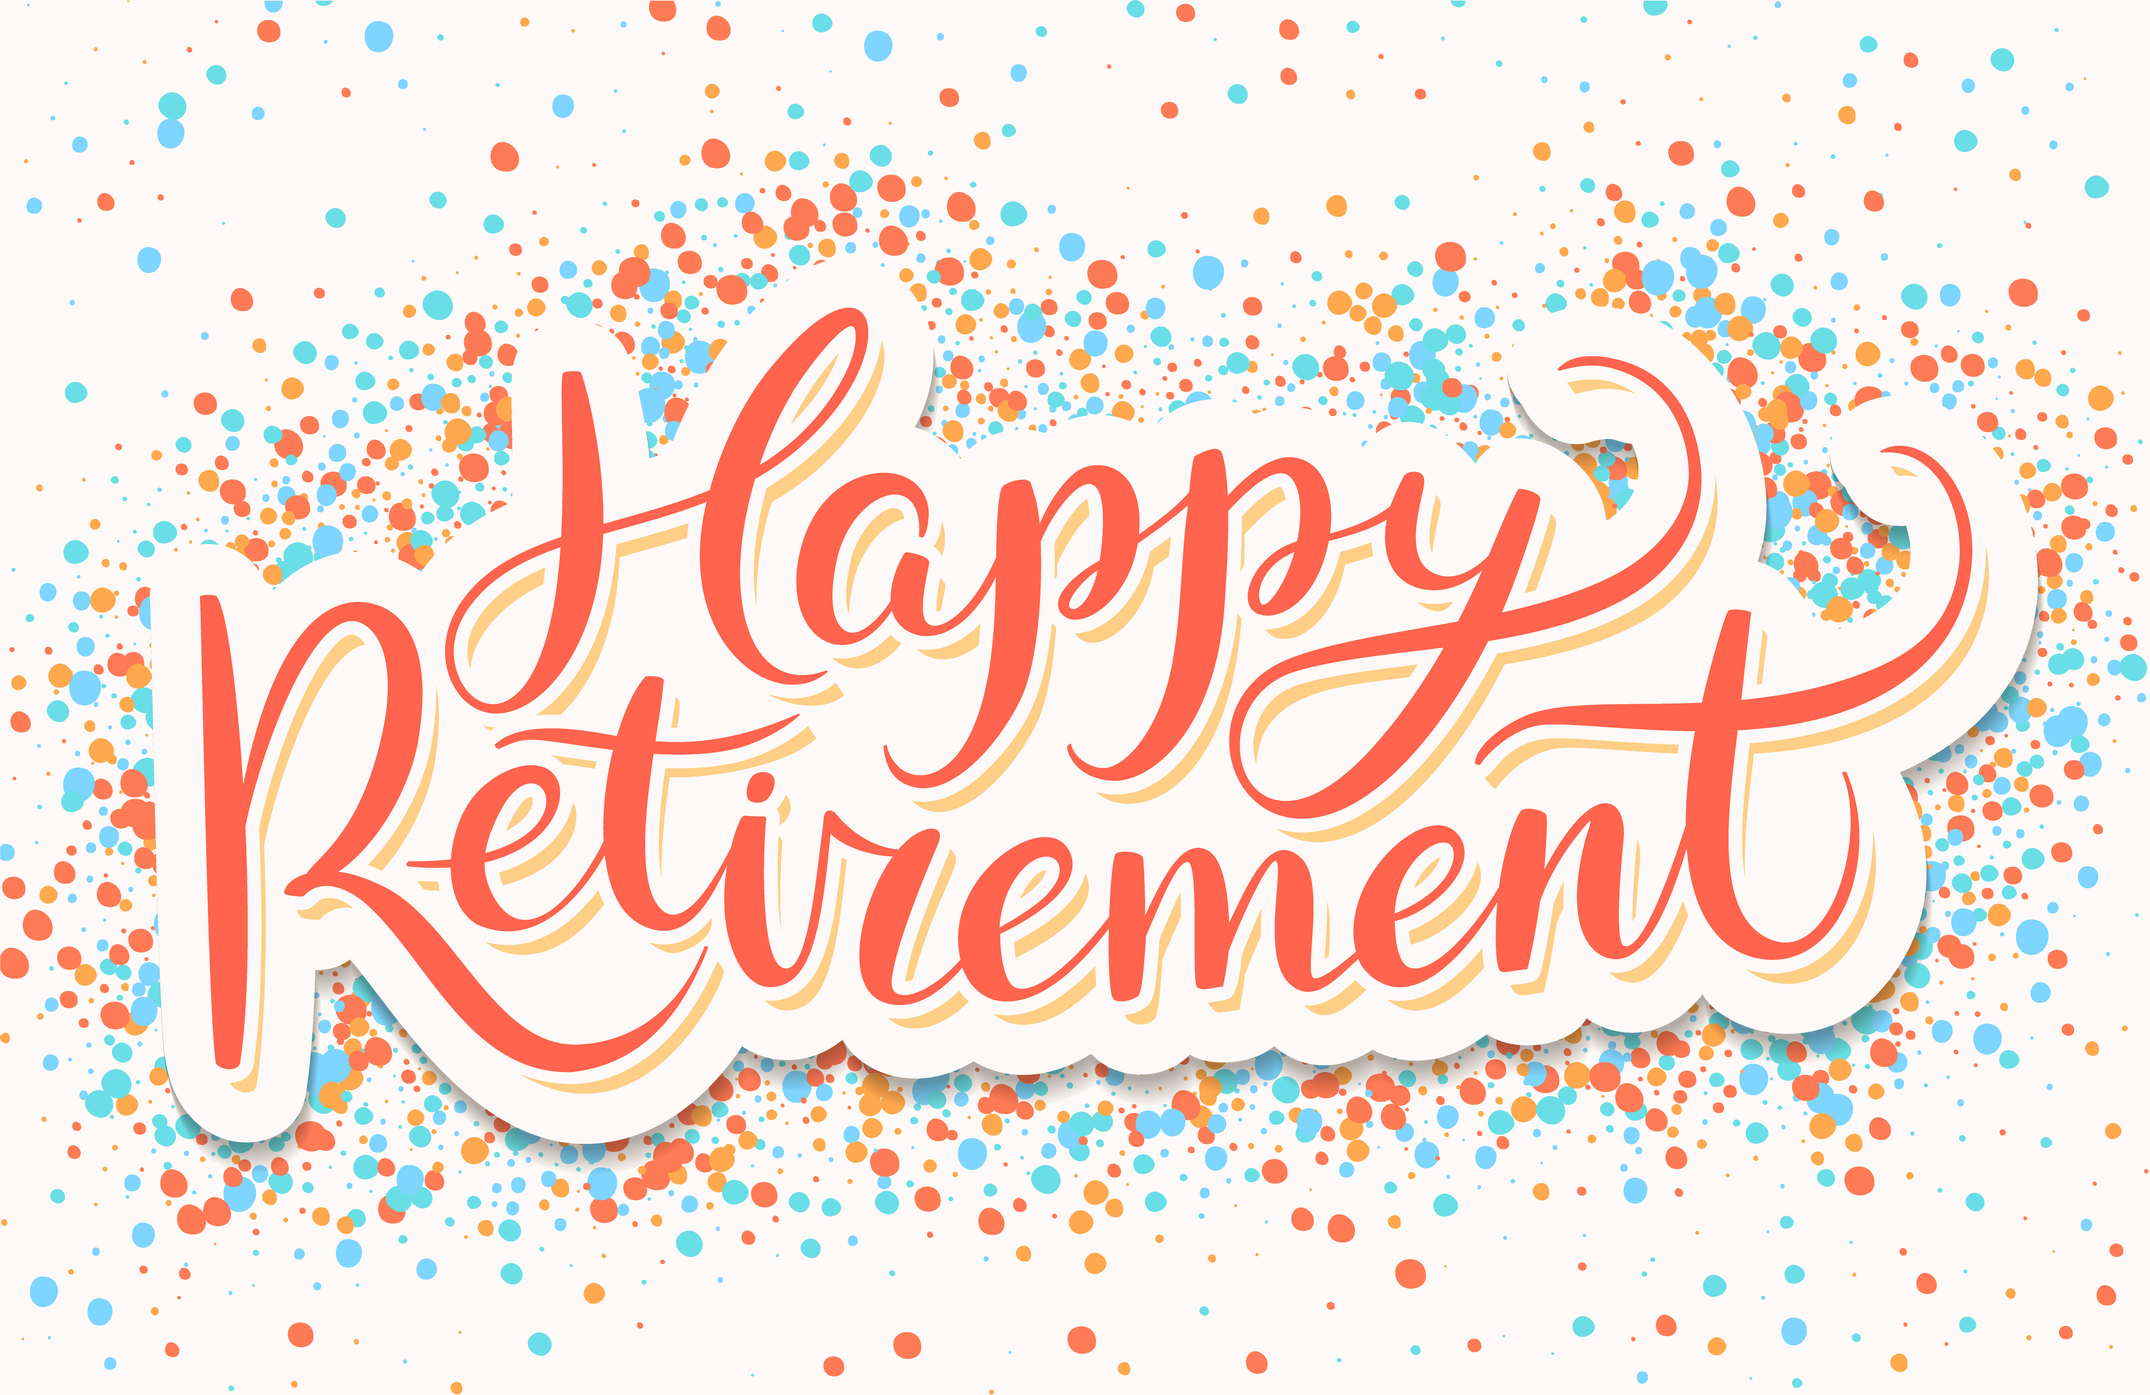 pink background with blue, red and orange confetti. Red lettering overlay reading, Happy Retirement